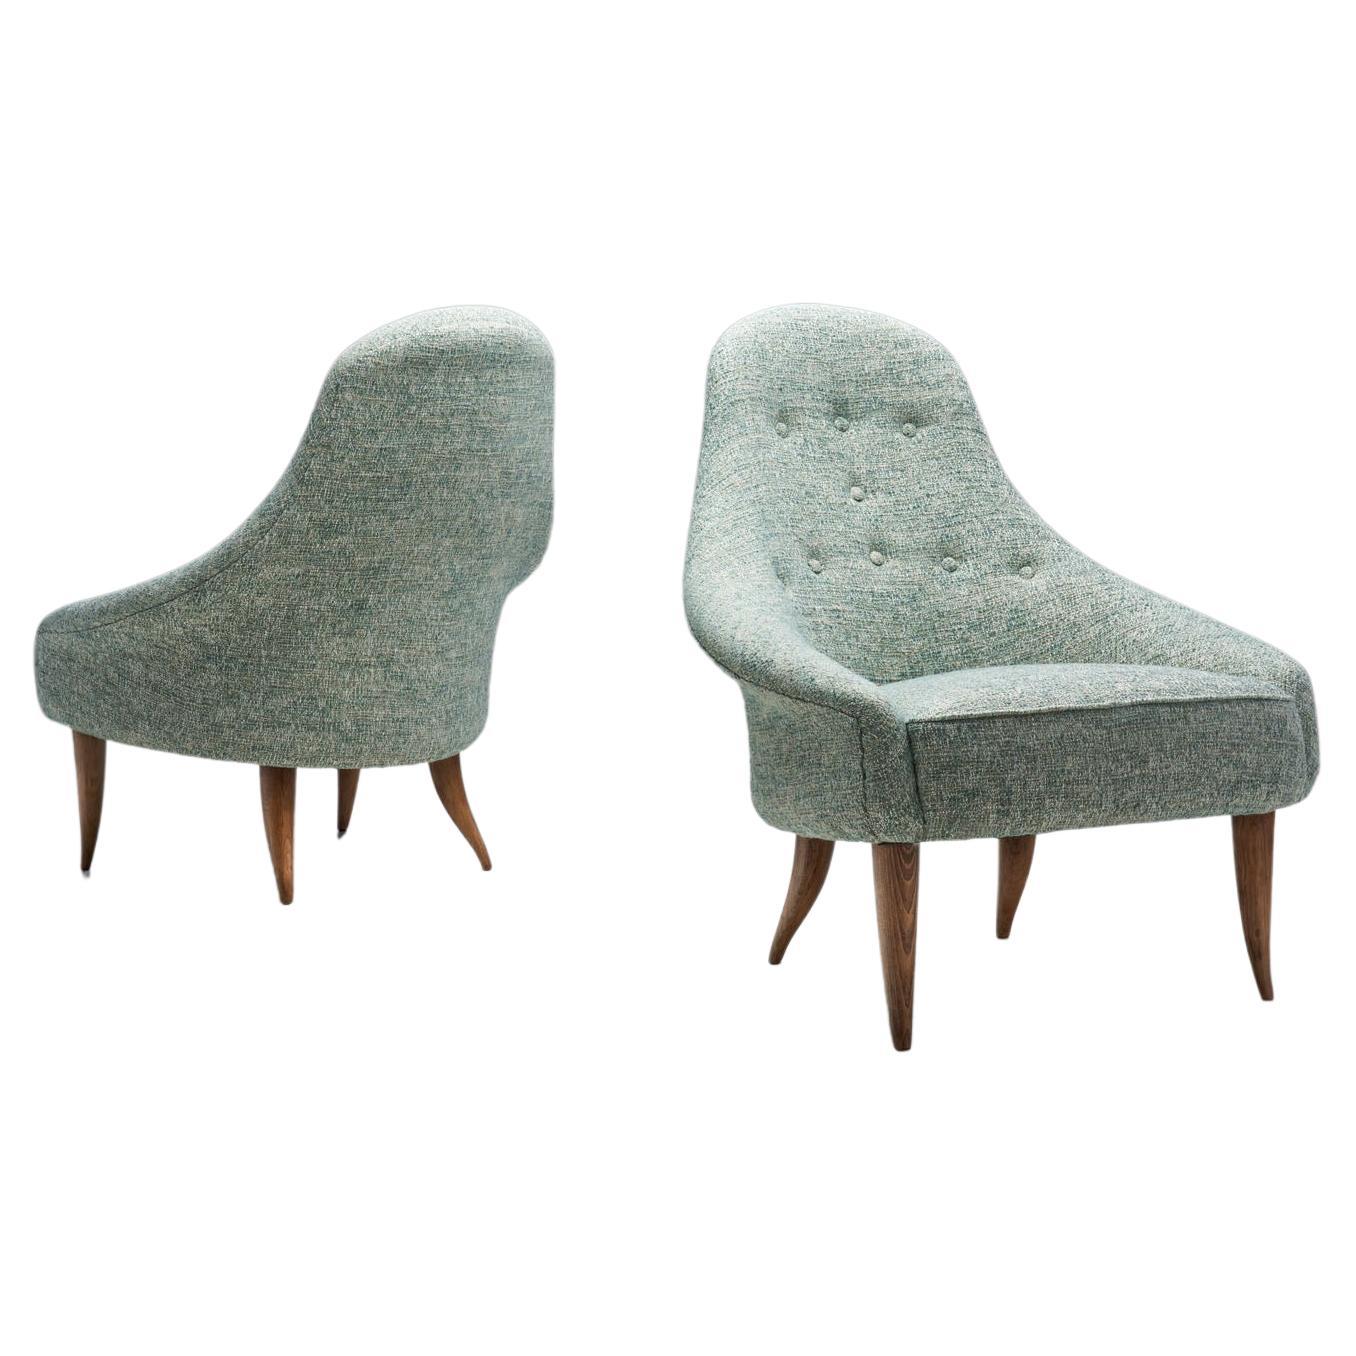 "Little Eva" Easy Chairs by Kerstin Hörlin-Holmquist, Sweden, 1950s For Sale